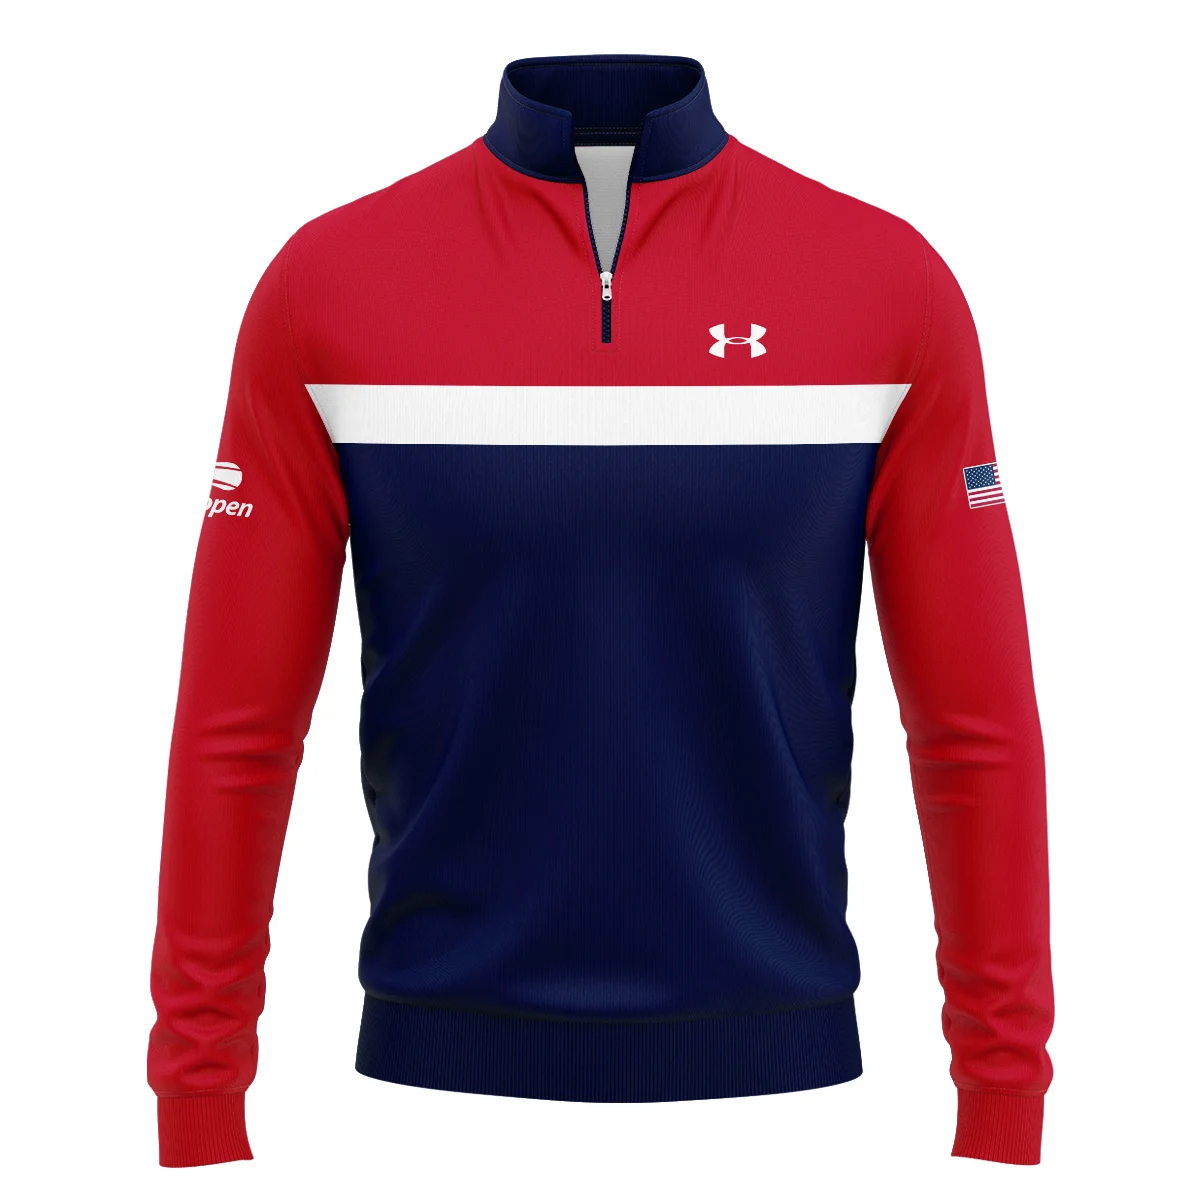 Under Armour Blue Red White Background US Open Tennis Champions Quarter-Zip Jacket Style Classic Quarter-Zip Jacket